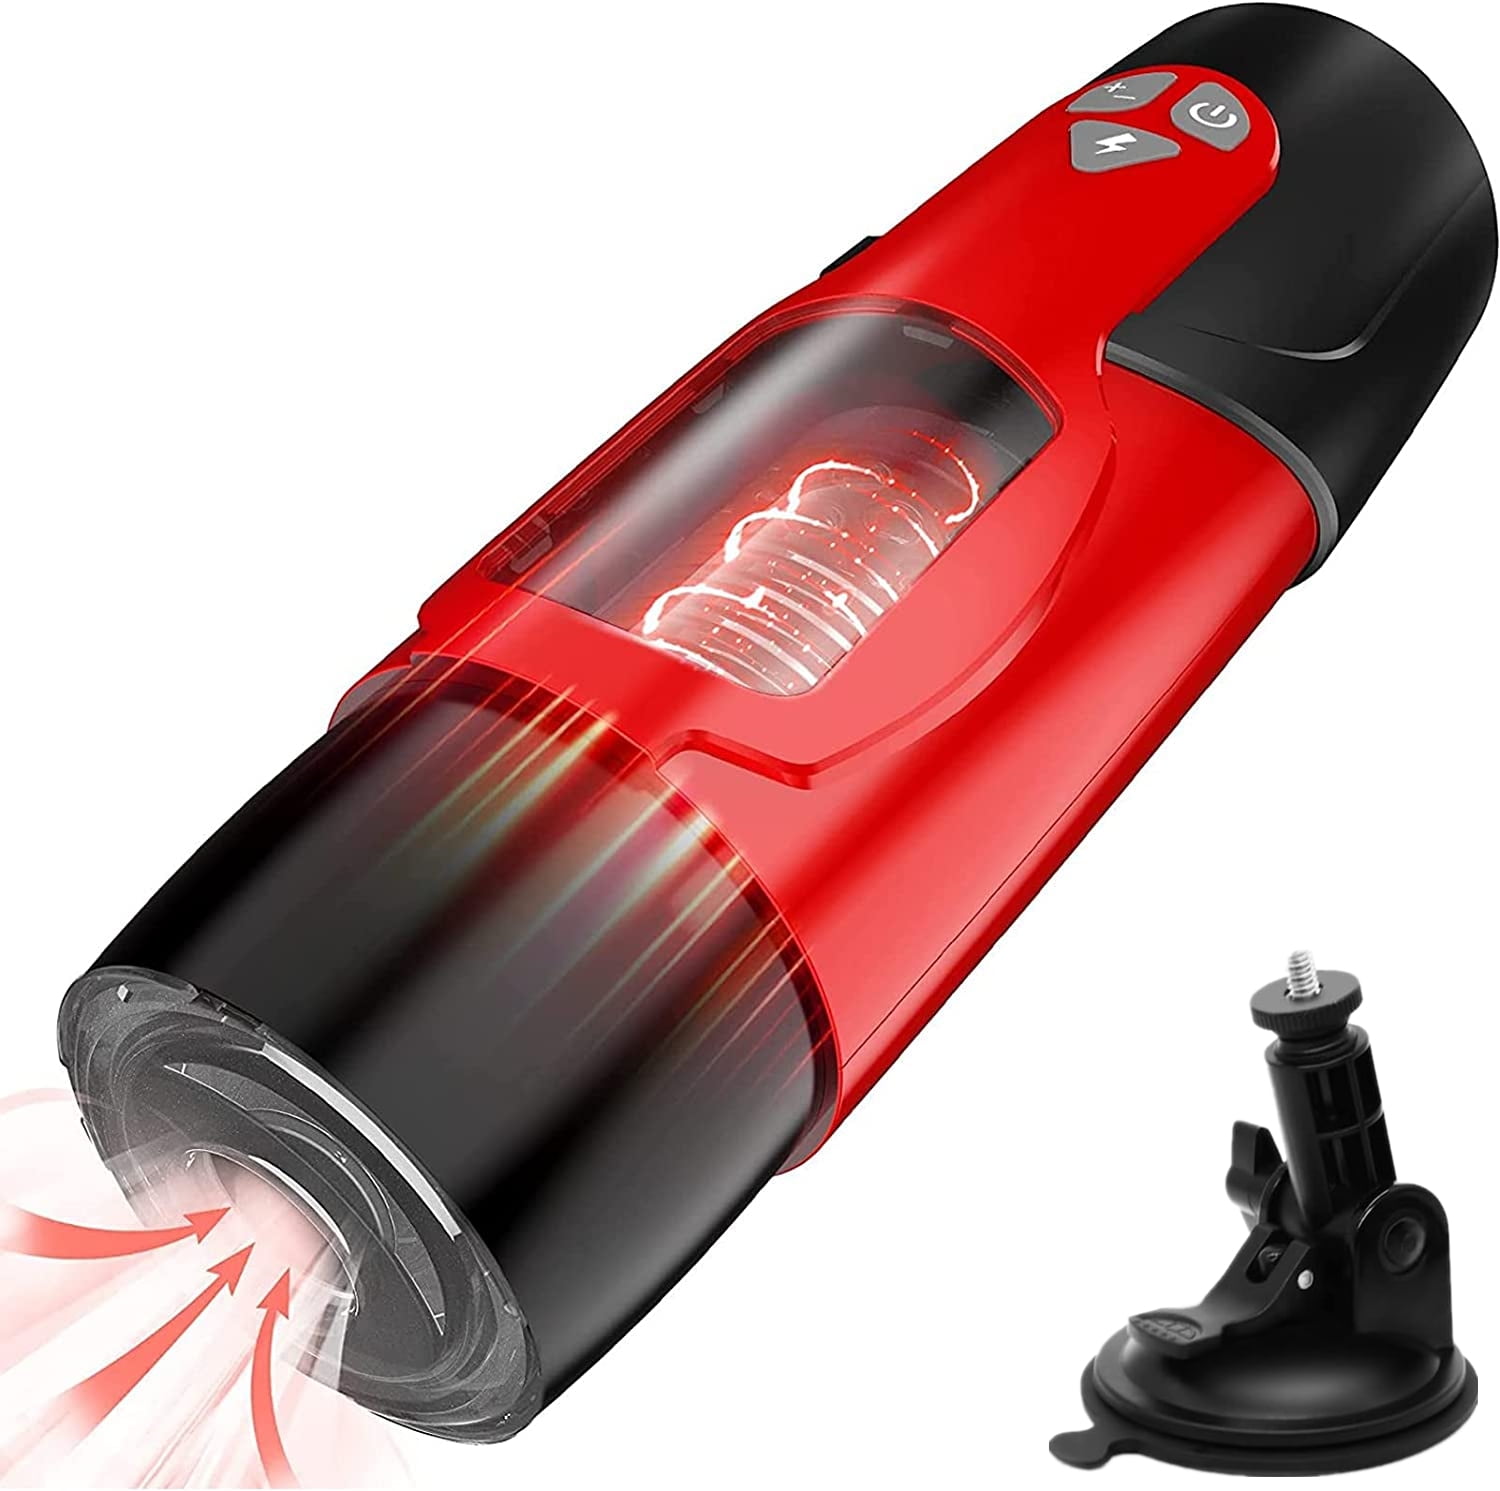 Automatic Male Masturbator Cup with 7 Powerful Thrusting Rotating Modes for Penis Stimulation, Adult Electric Pocket Stroker Male Sex Toys for photo